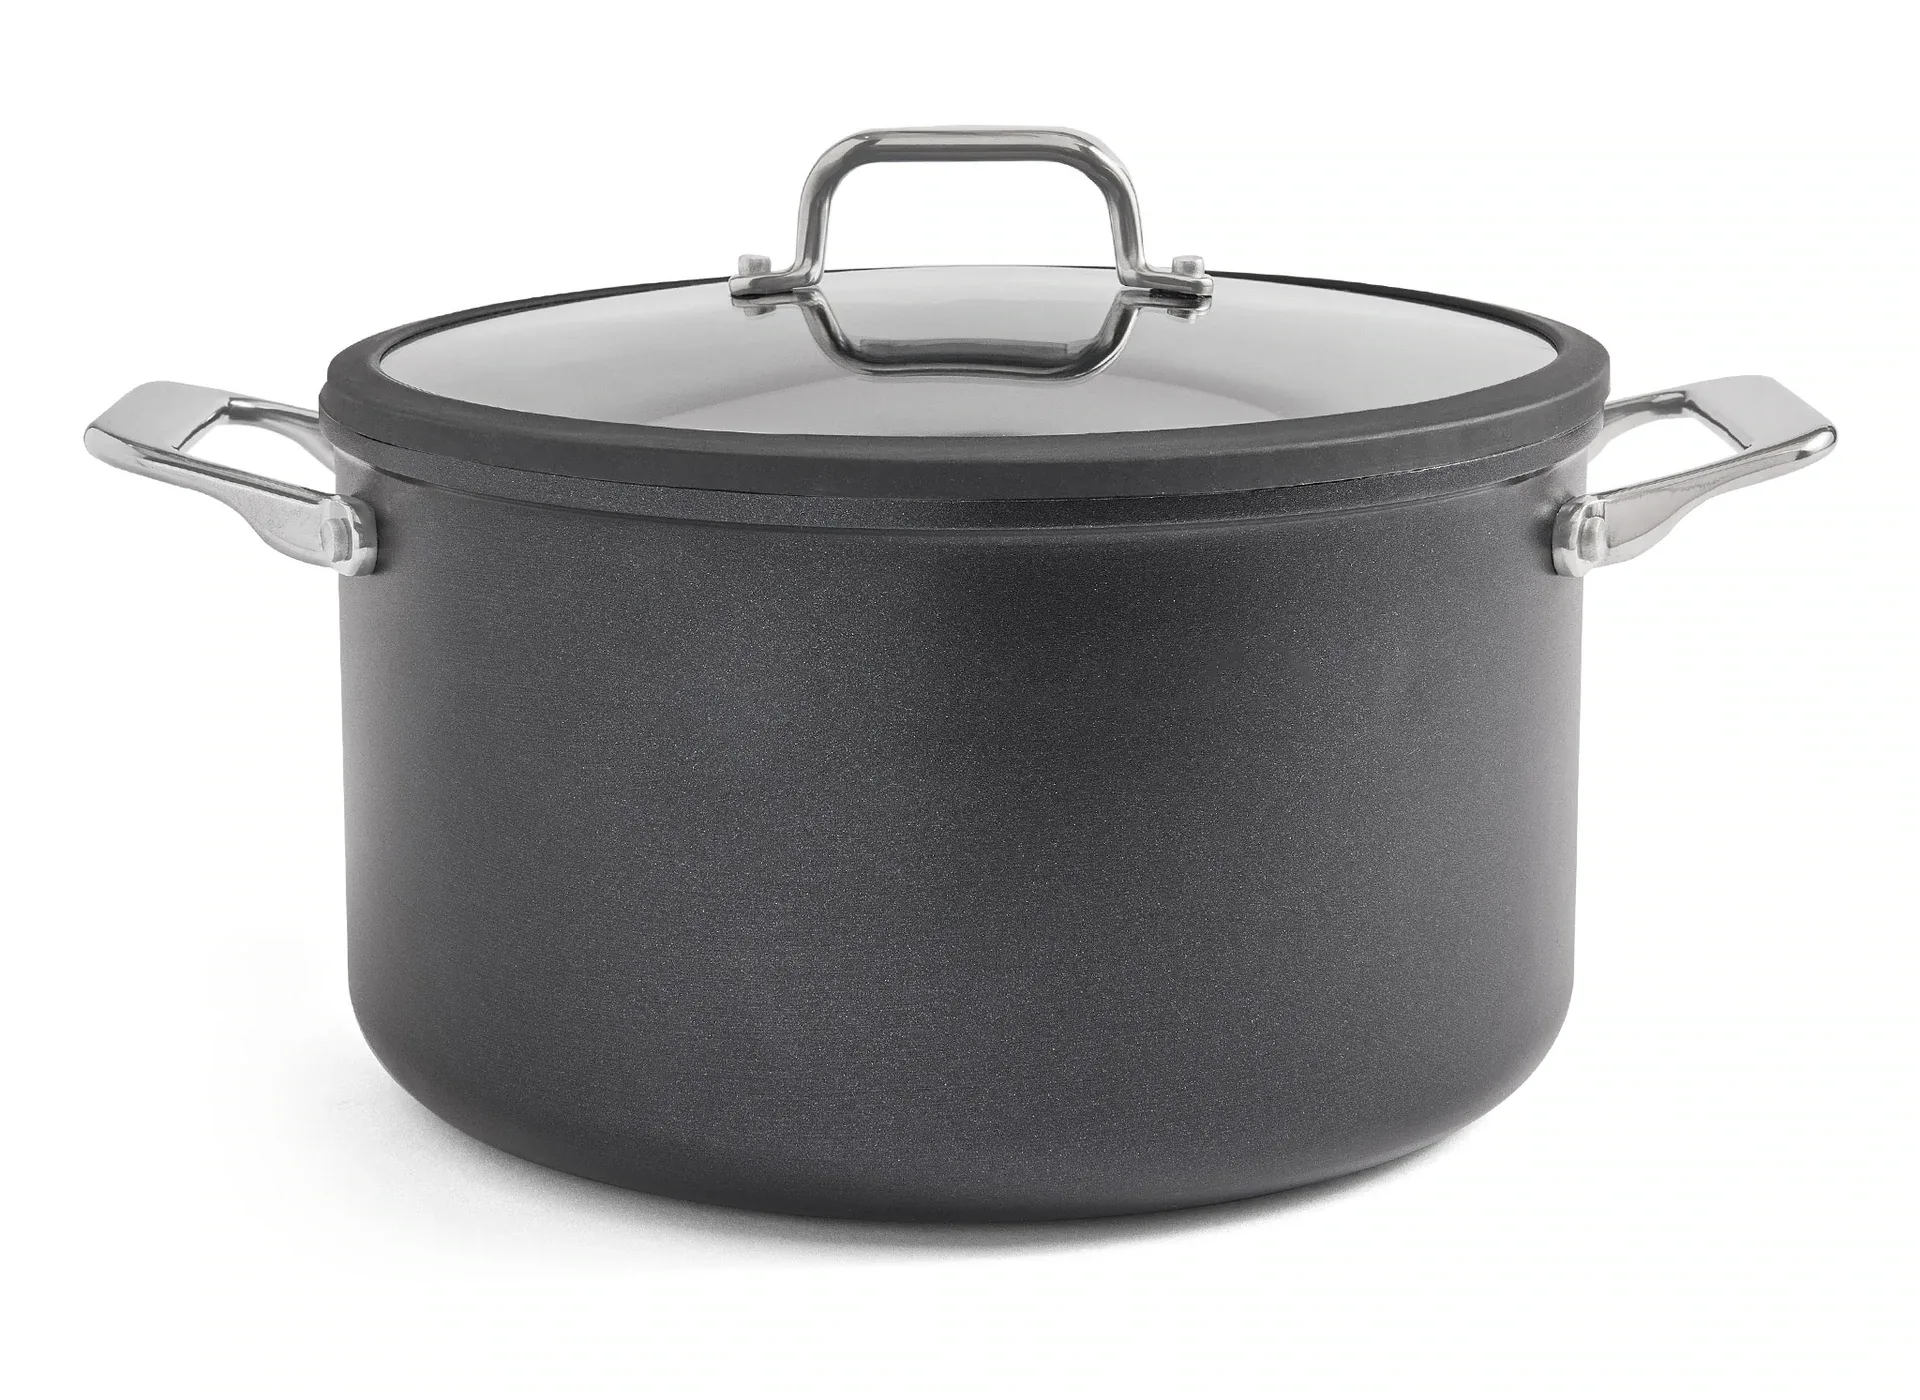 Misen Cookware Is Up to 34% Off at  Today Only